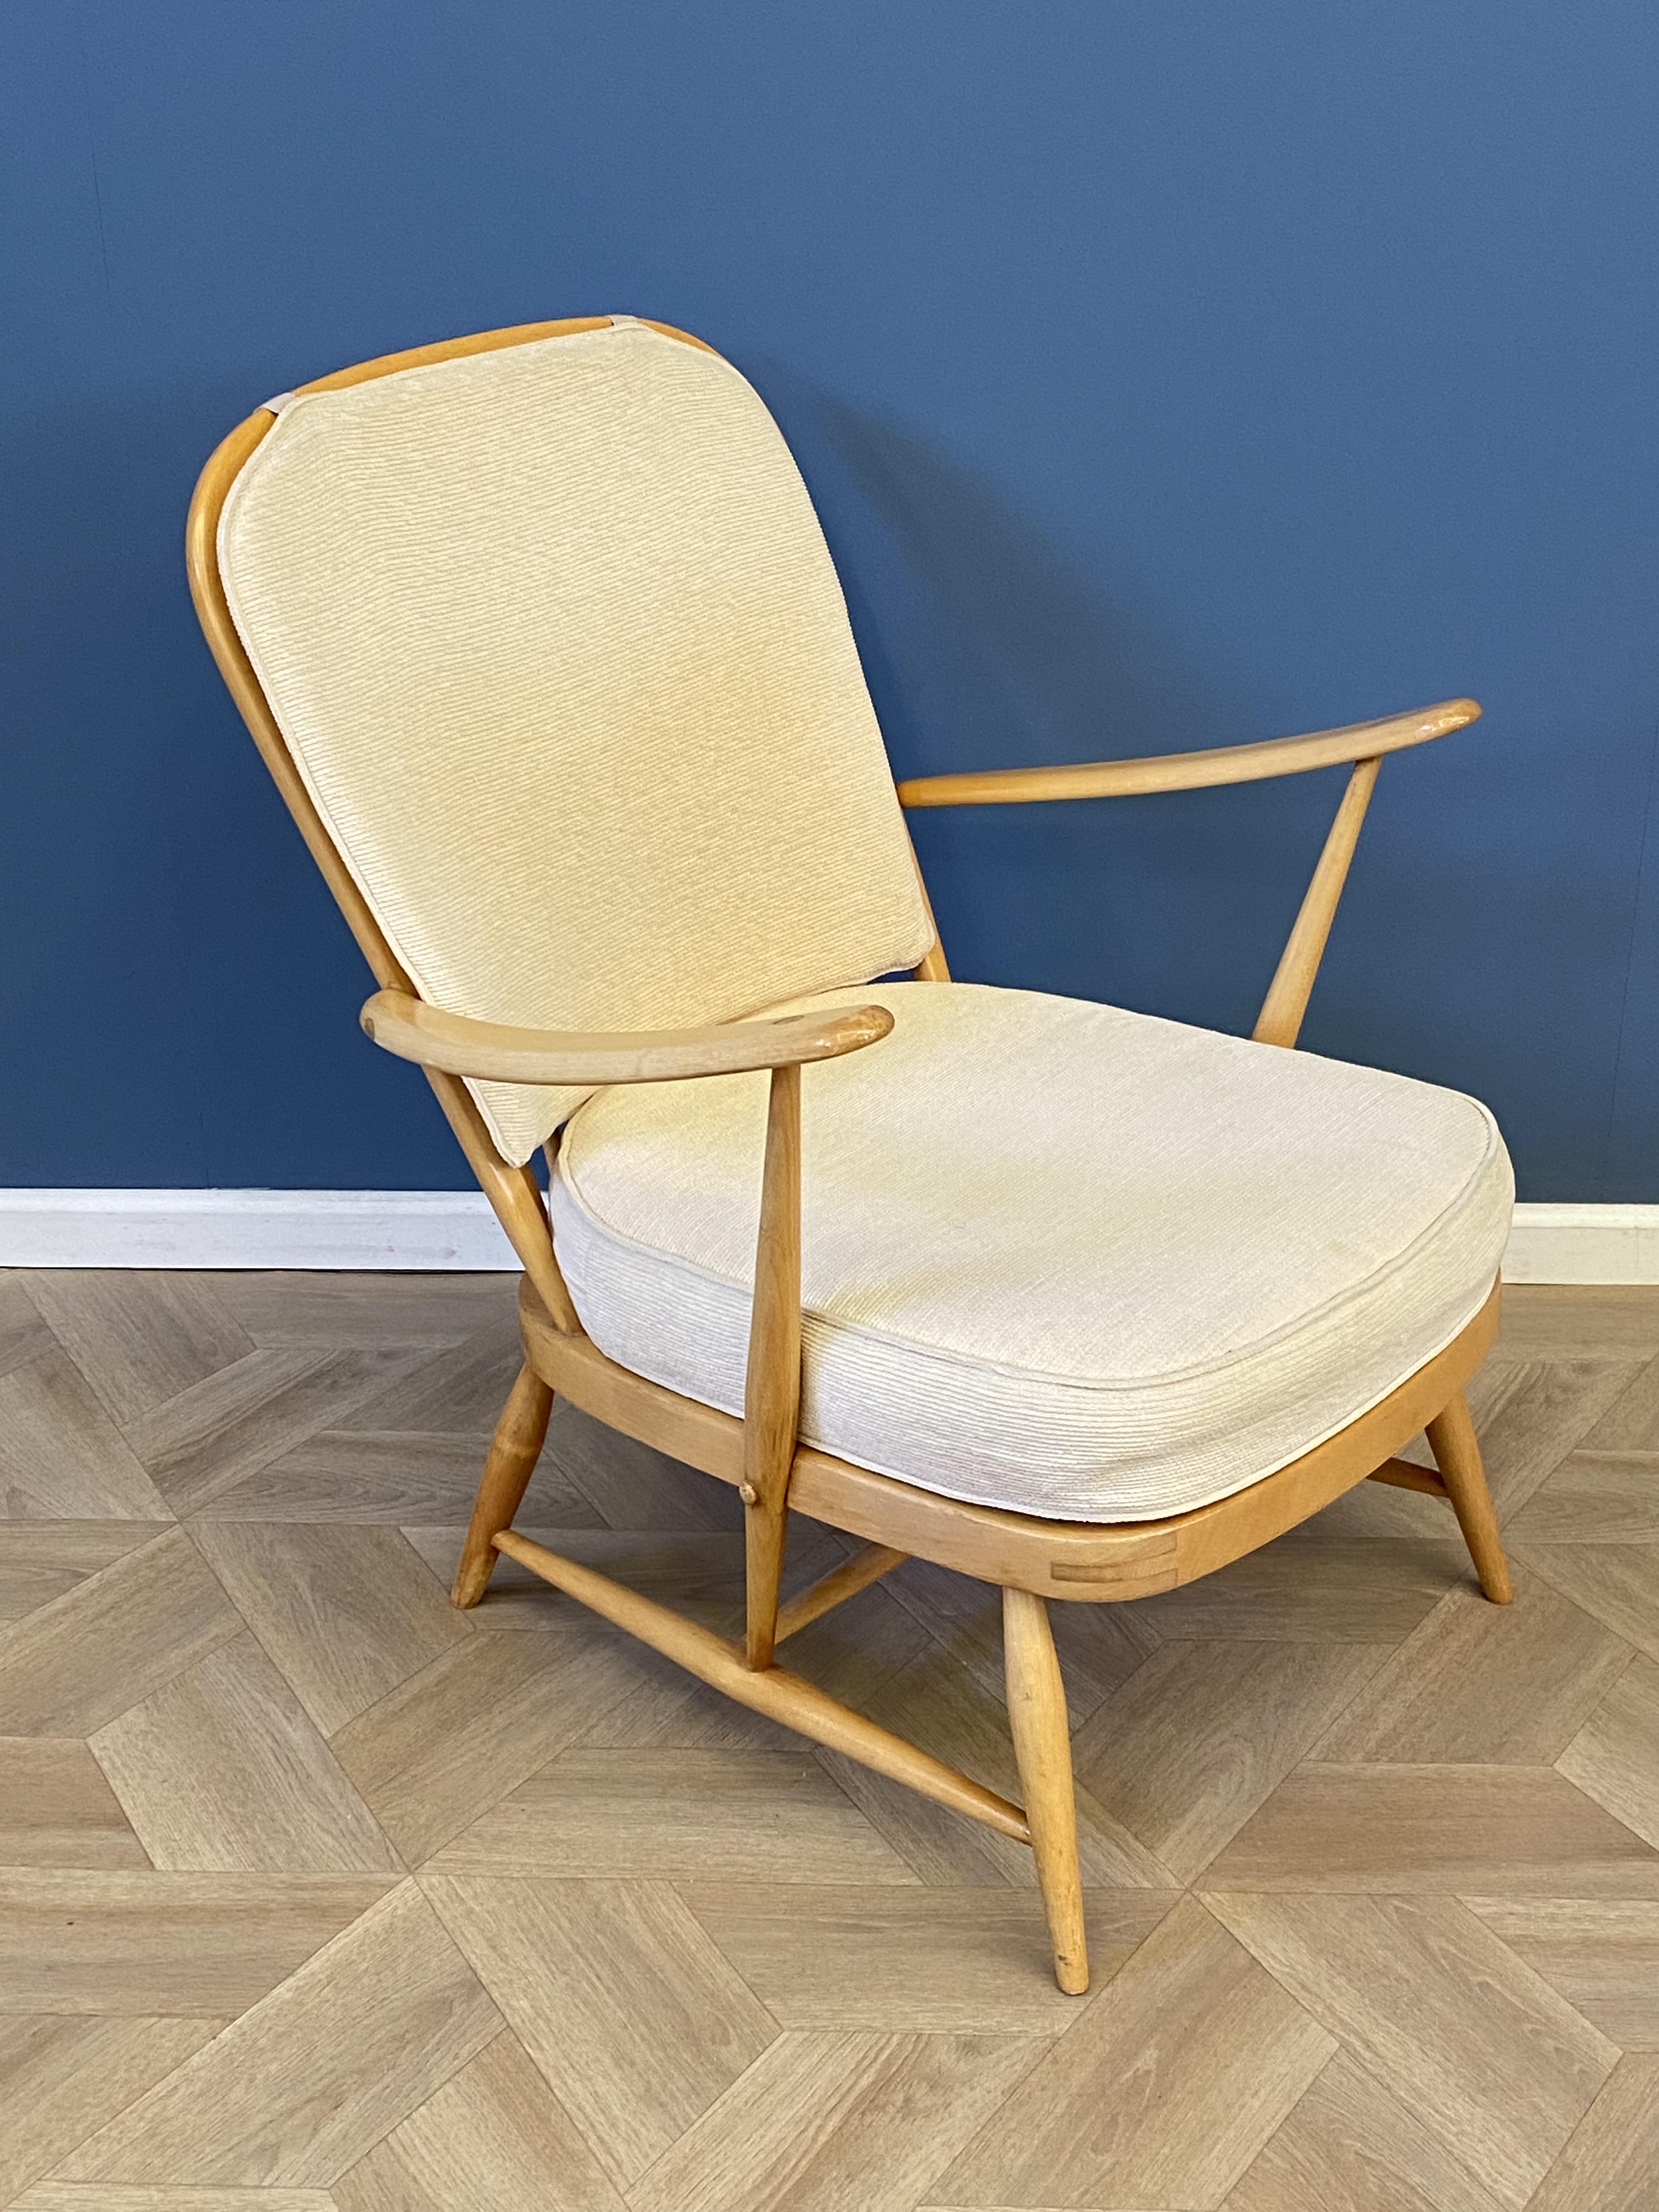 Ercol style open armchair - Image 6 of 7